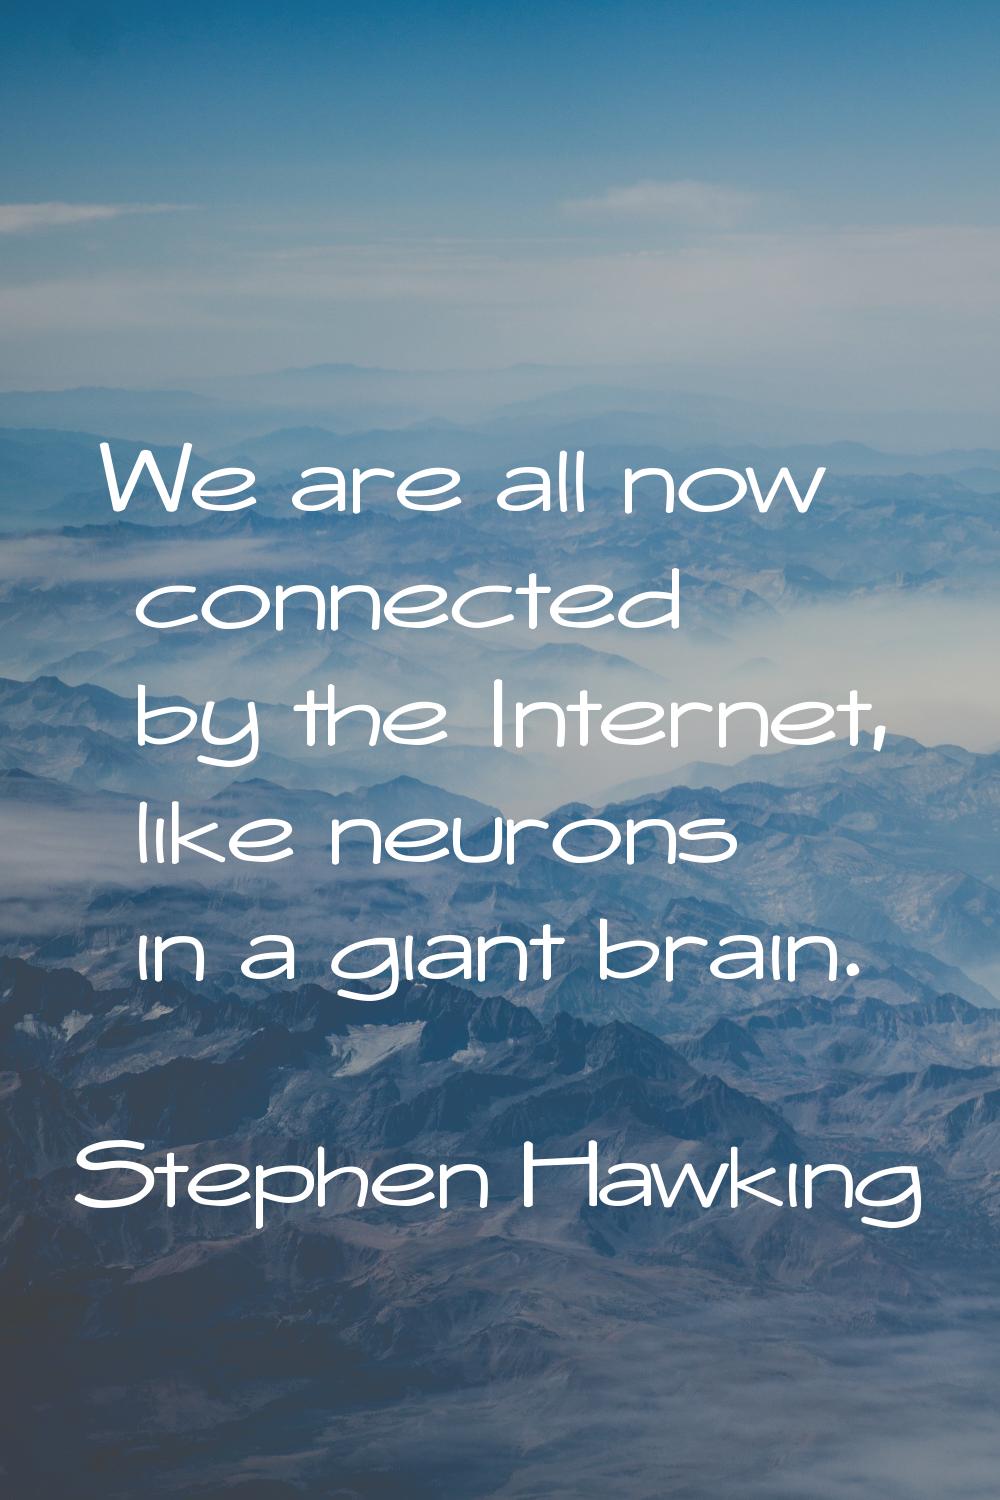 We are all now connected by the Internet, like neurons in a giant brain.